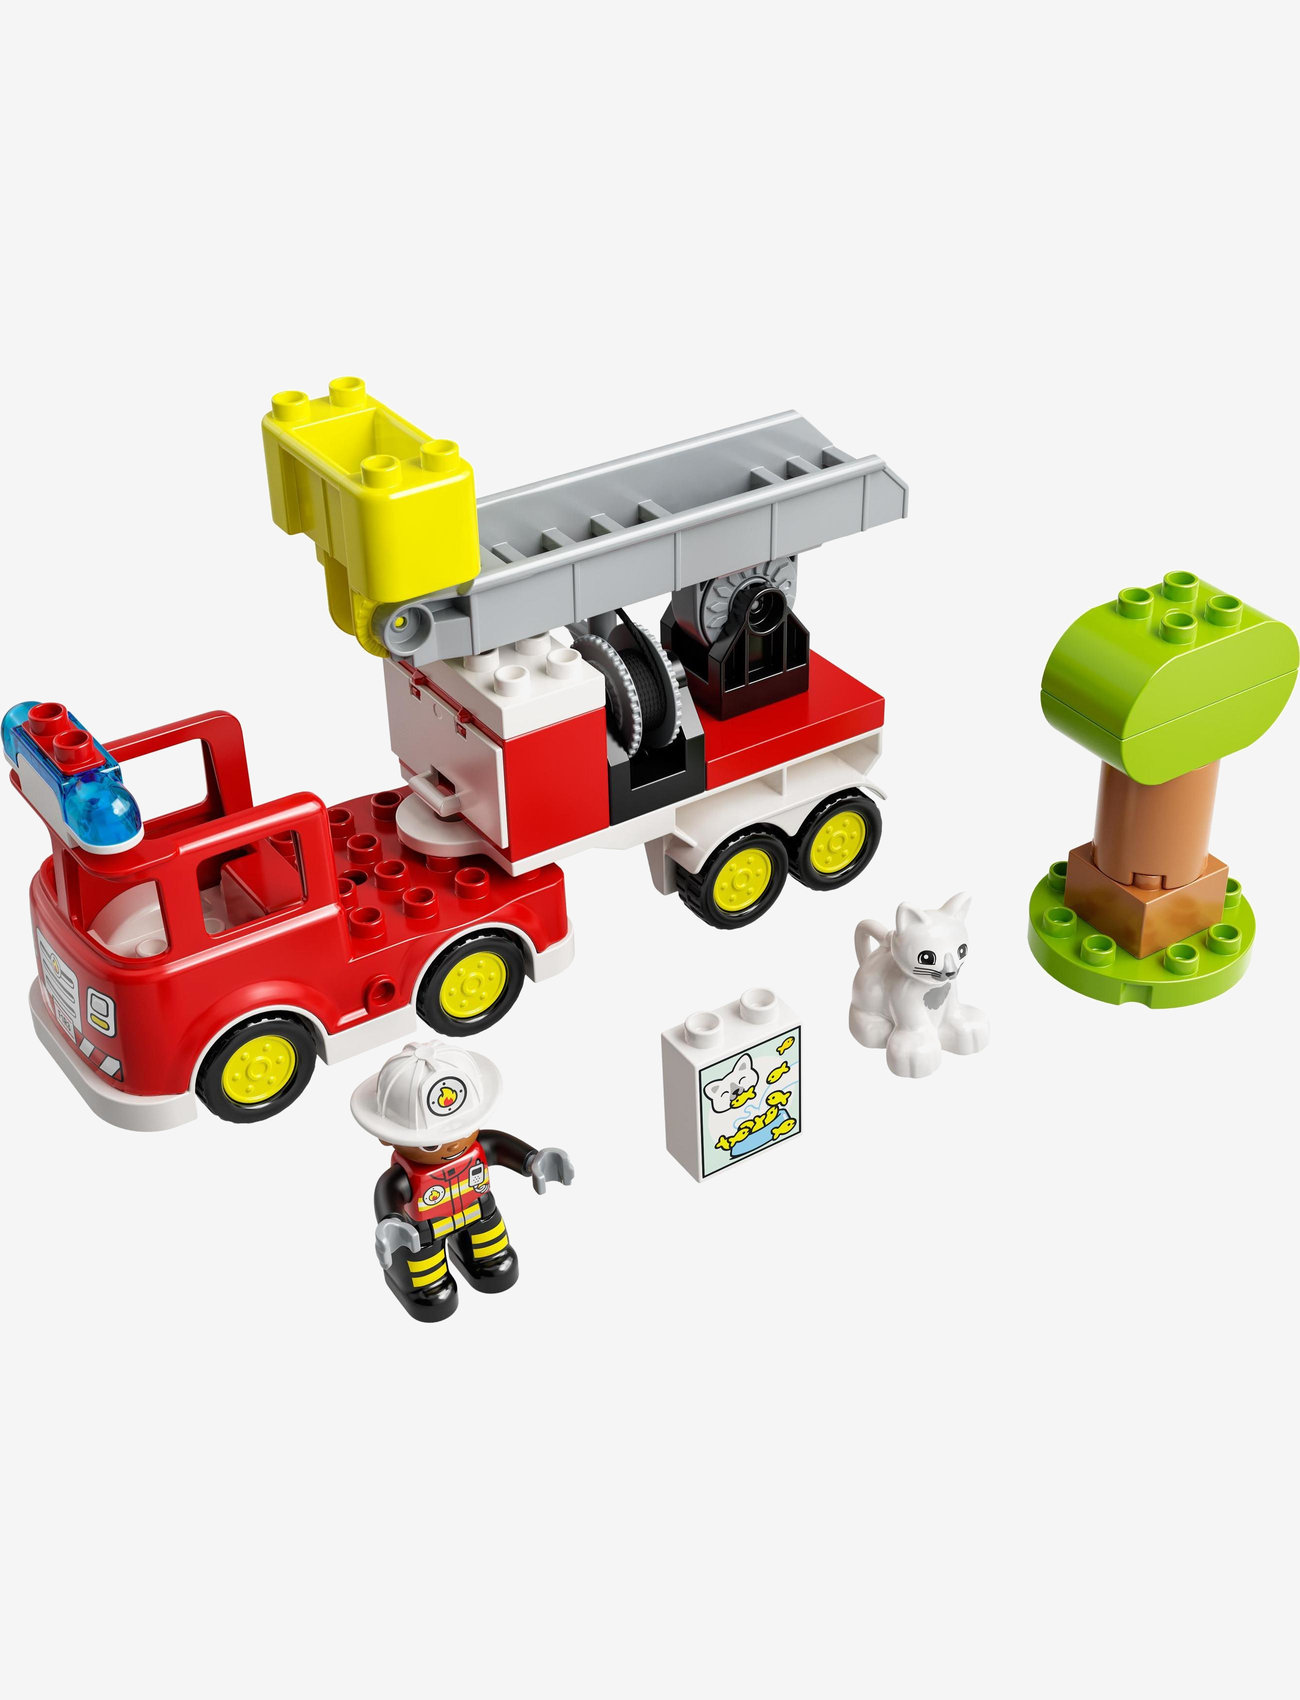 LEGO - Town Fire Engine Toy for 2 Year Olds - lego® duplo® - multicolor - 1